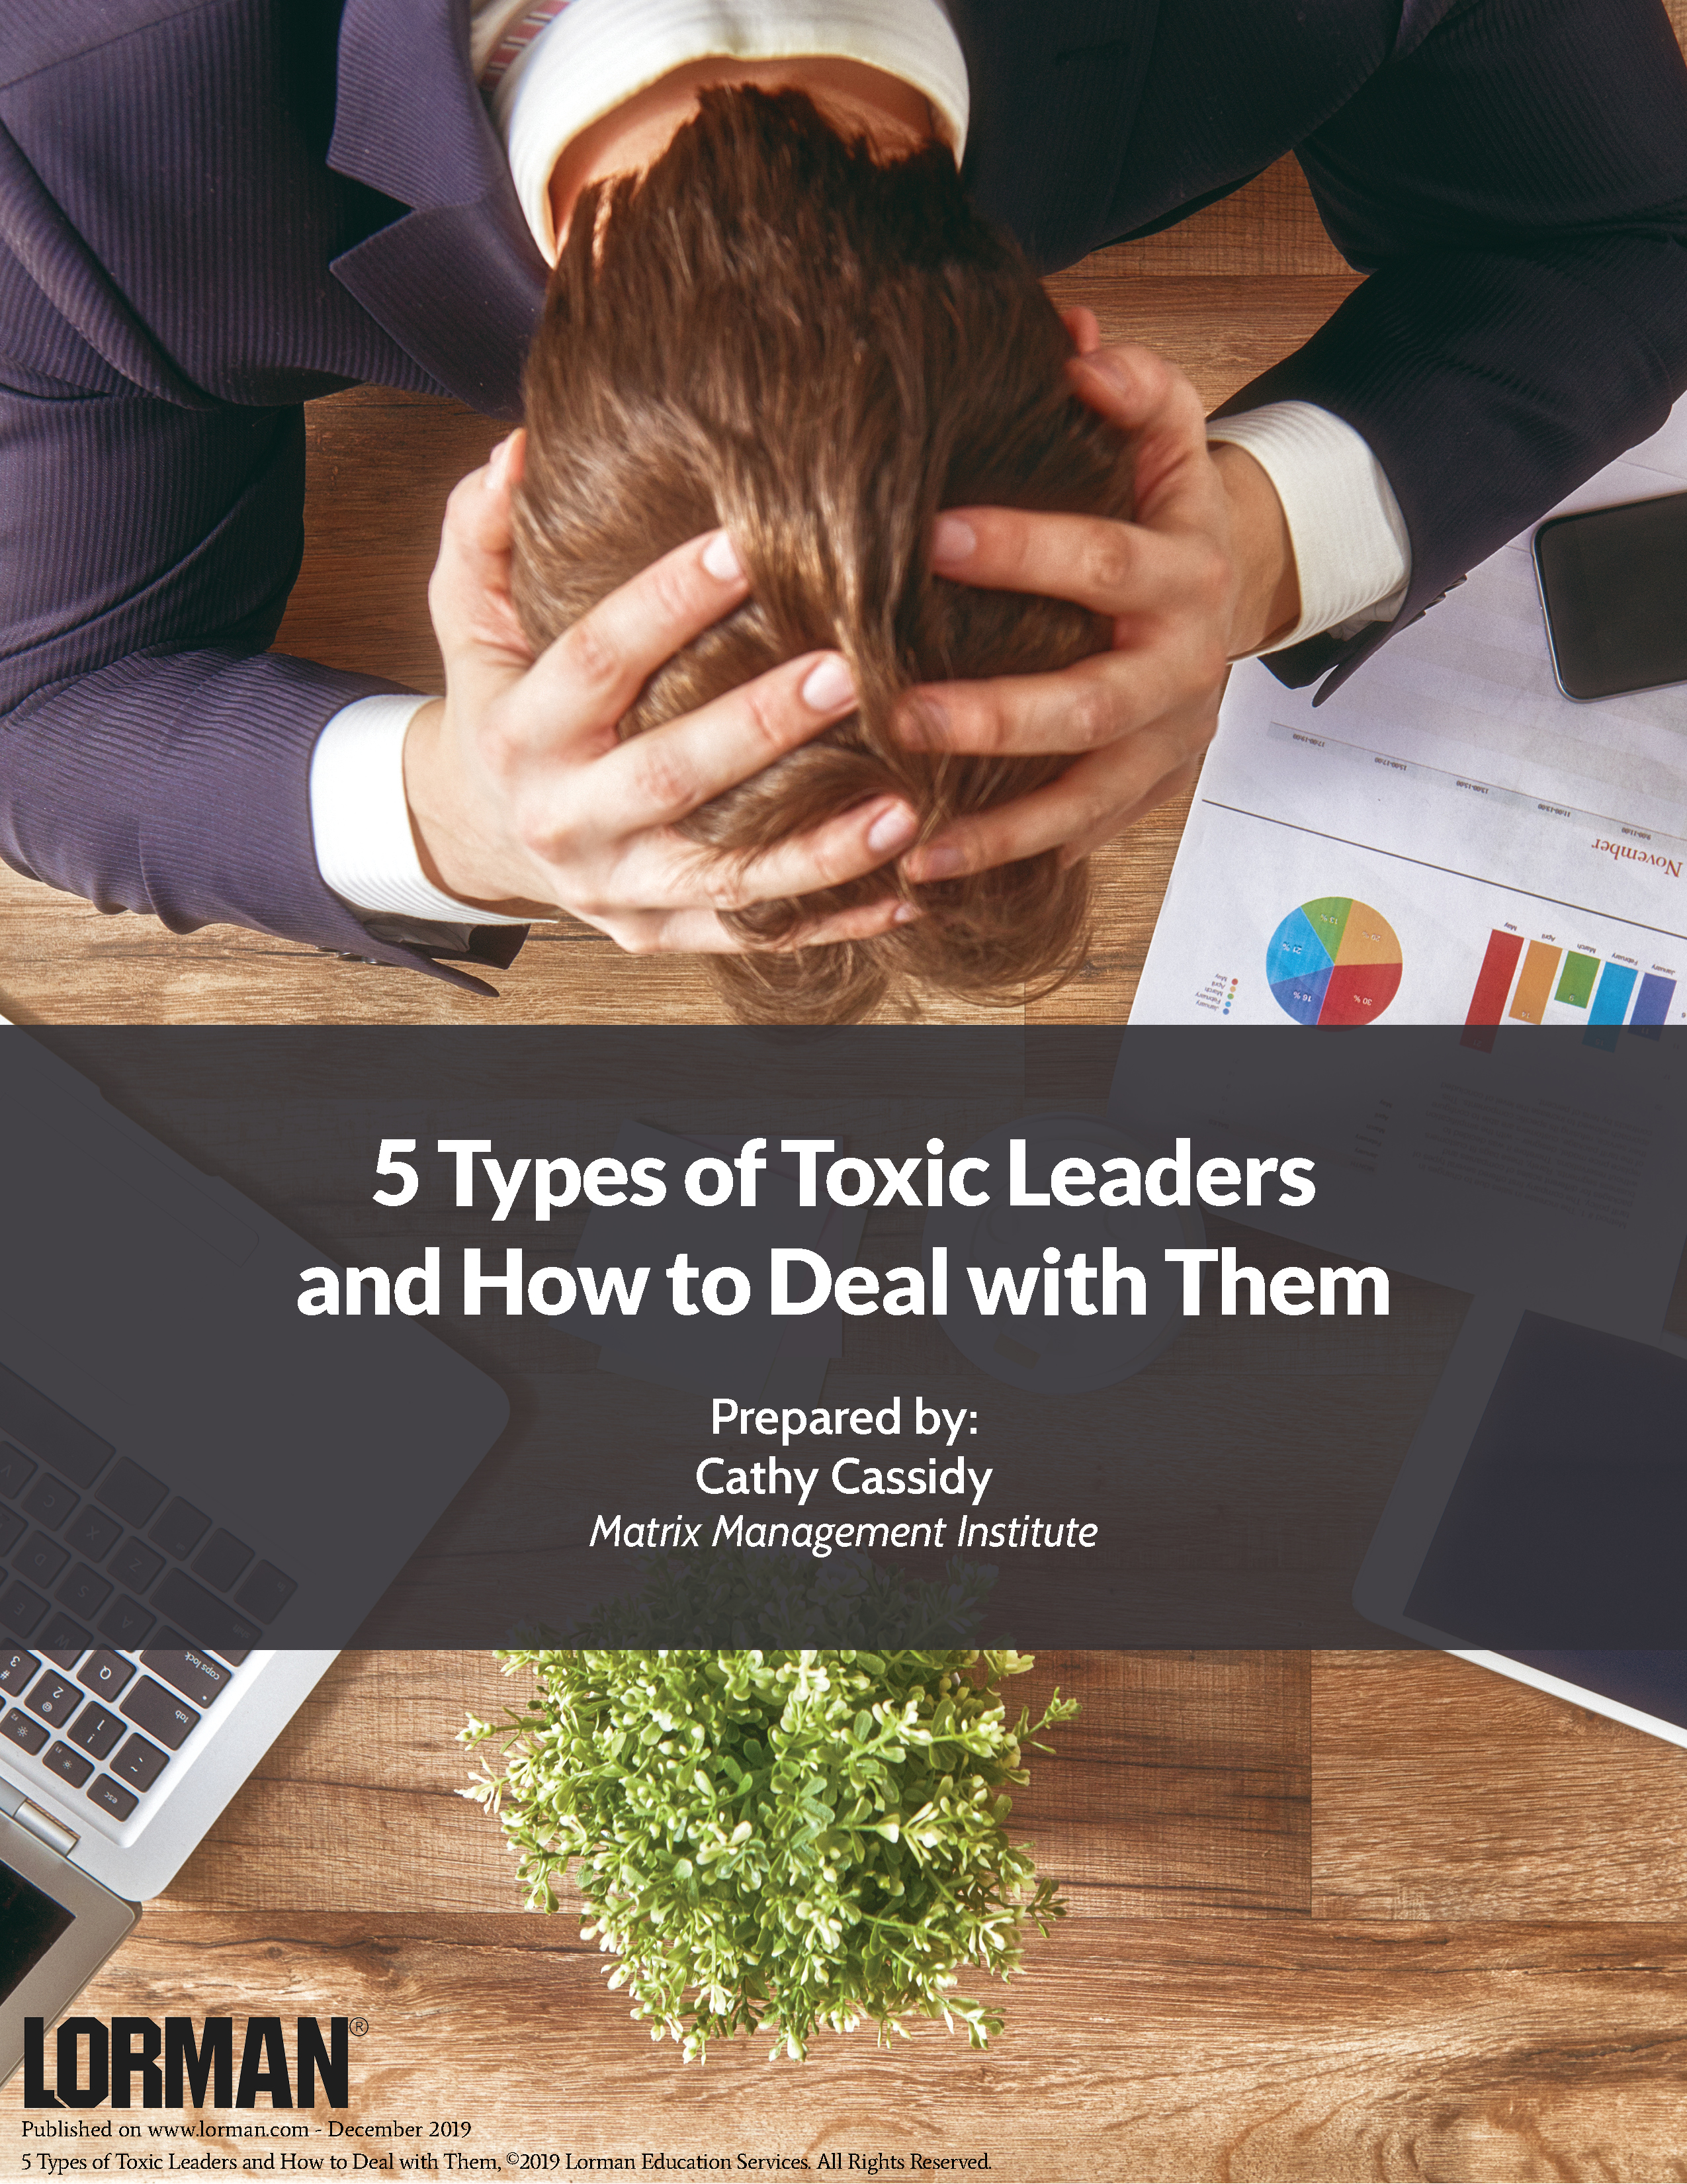 5 Types of Toxic Leaders and How to Deal with Them